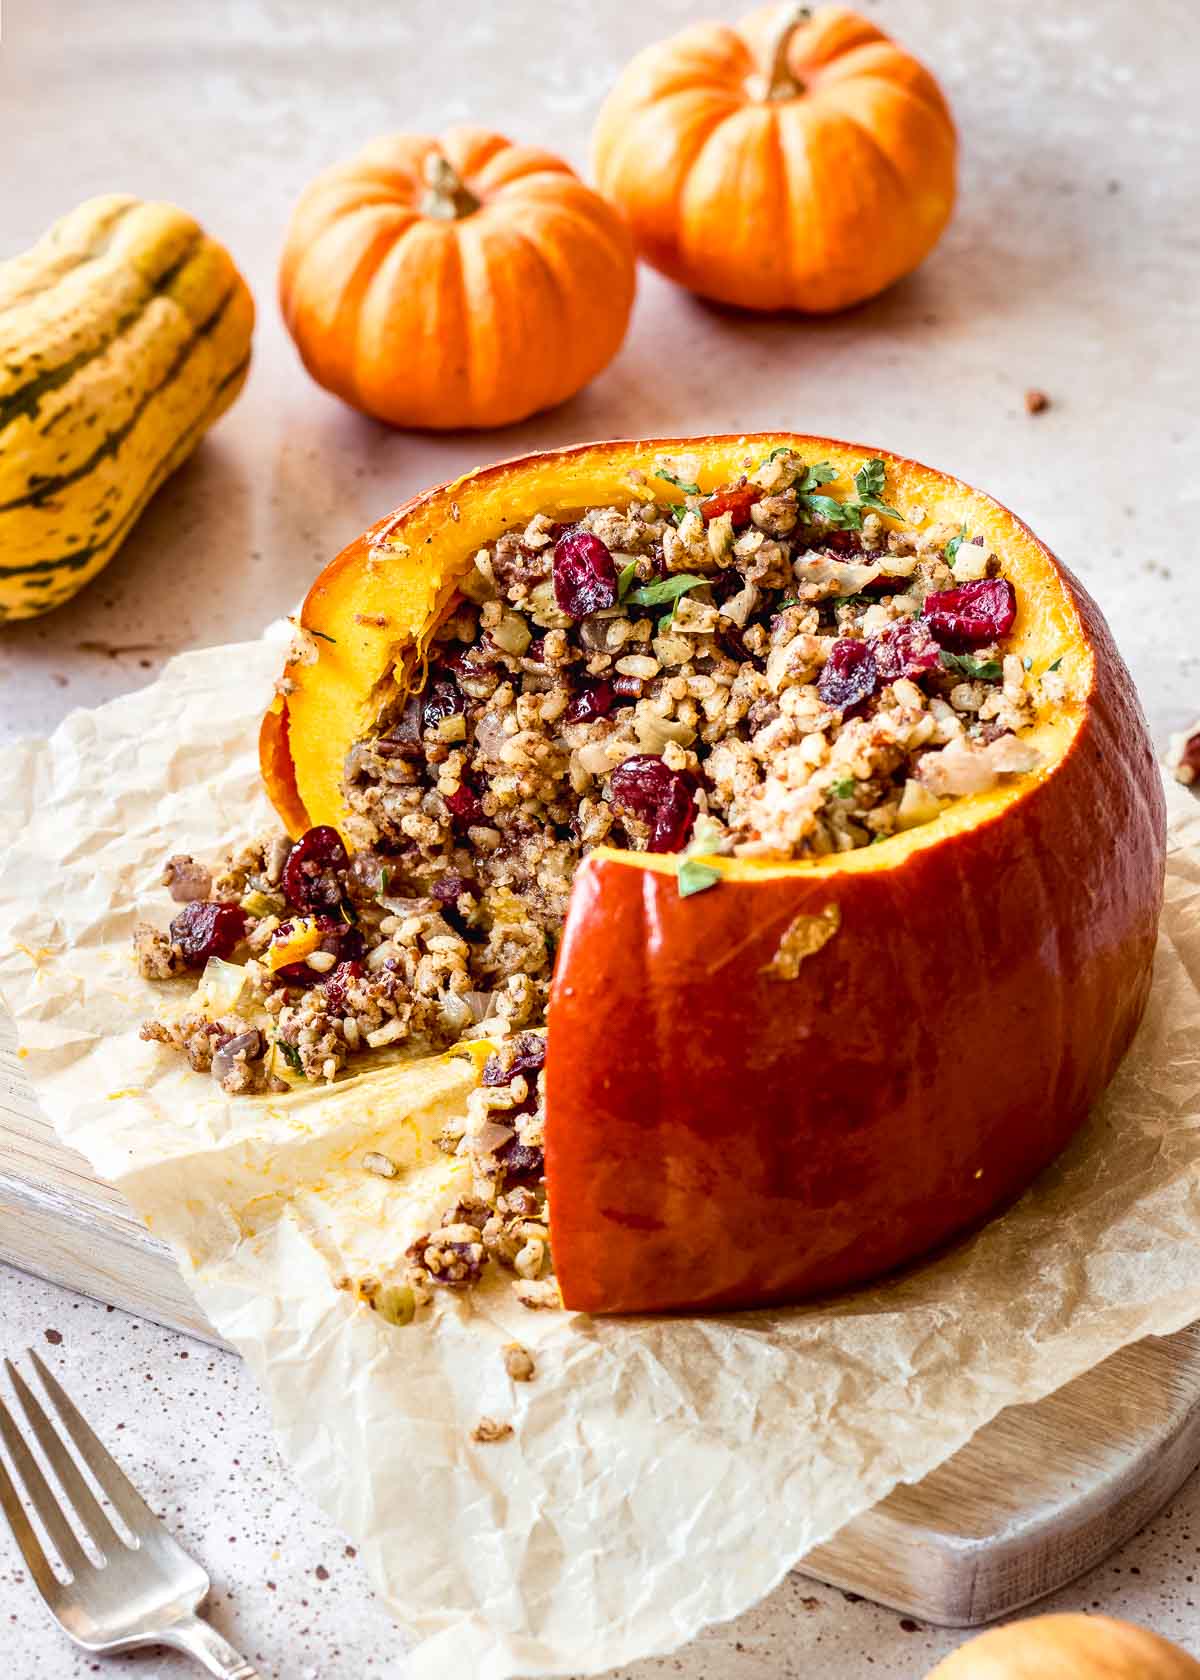 Vegan stuffed pumpkin with rice, pecans and cranberries sits on parchment paper, with small decorated squash and fork in background. A slice has been cut out of the pumpkin.